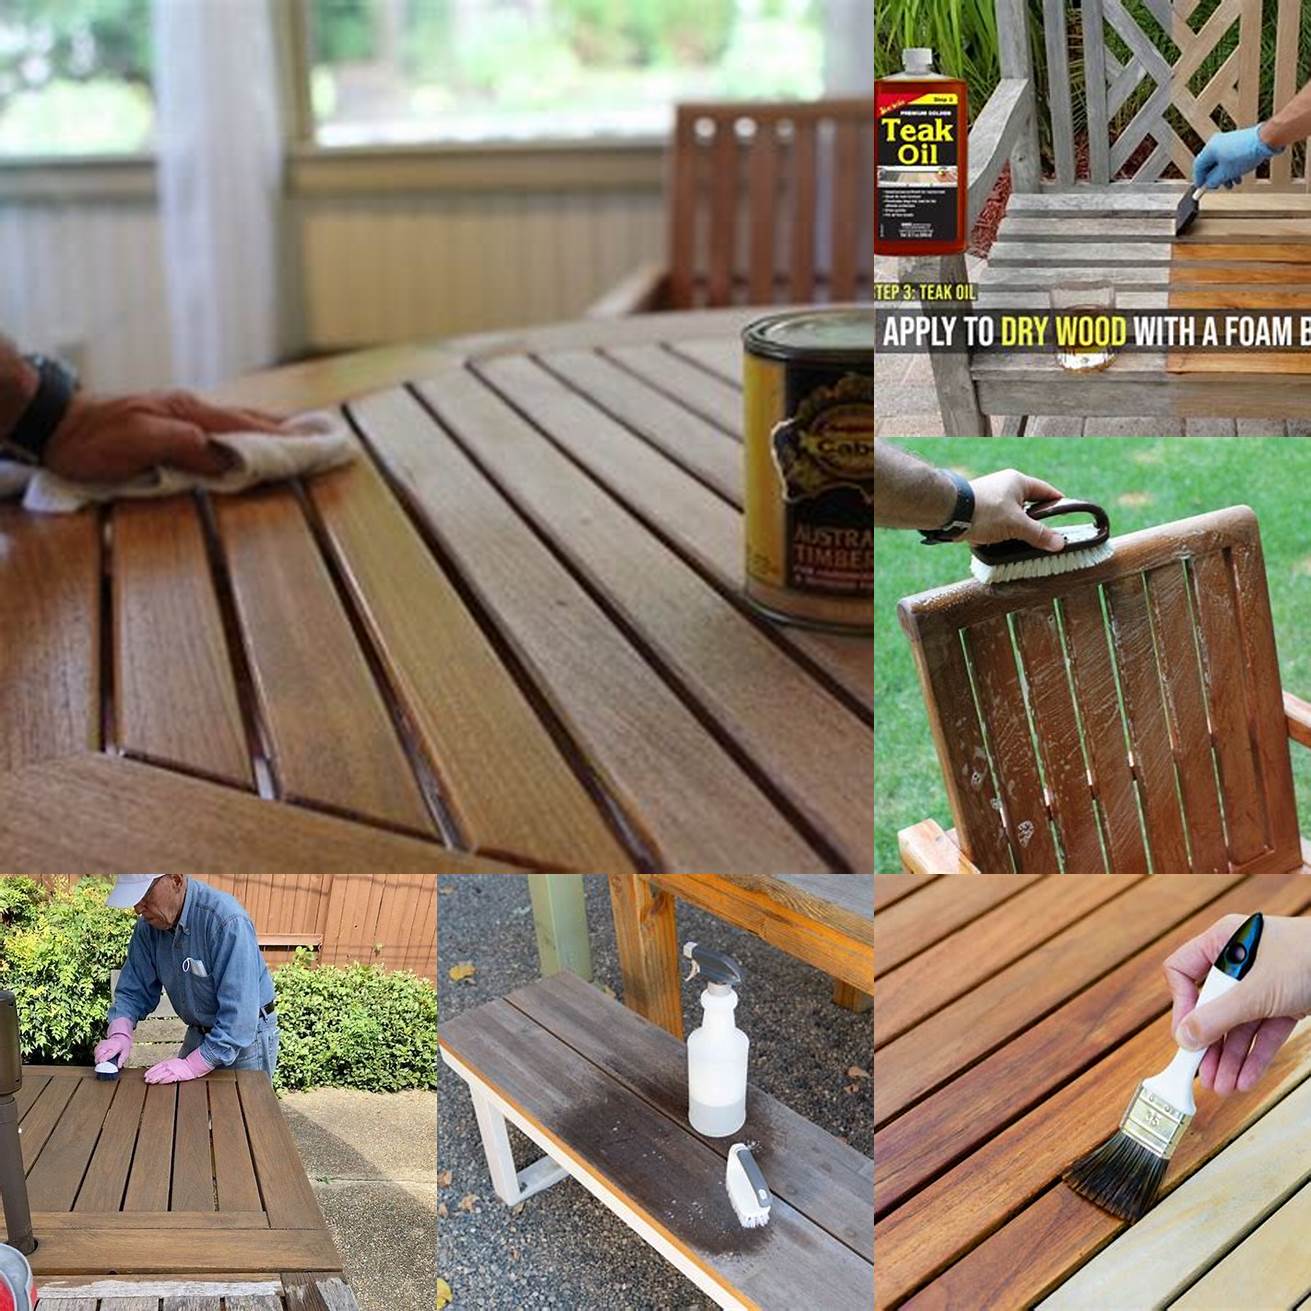 Seal the teak furniture after cleaning